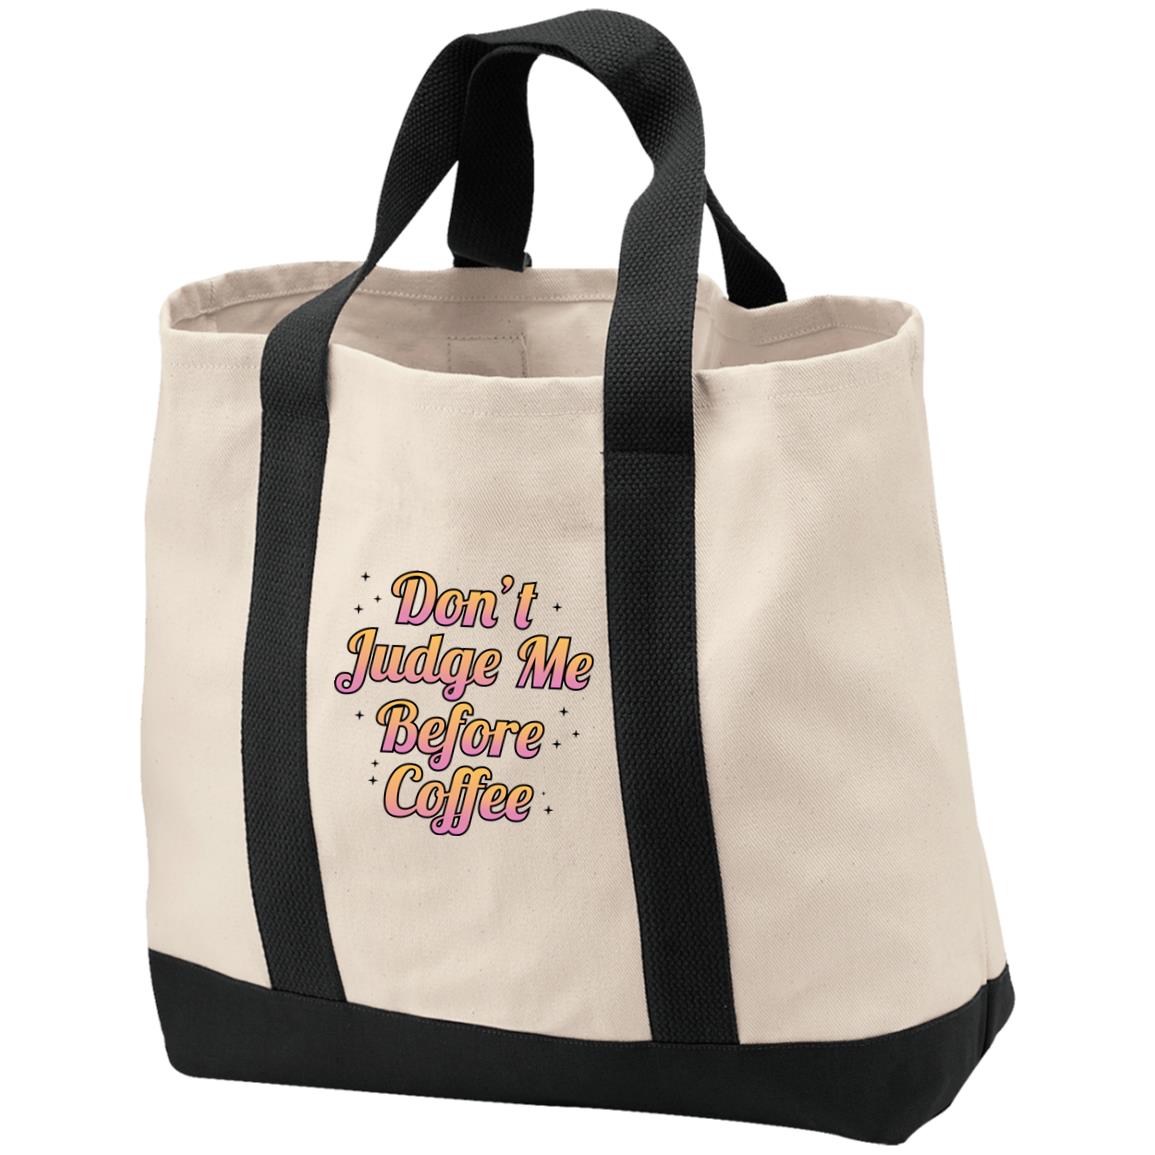 Don't Judge Me Before Coffee 2-Tone Shopping Tote